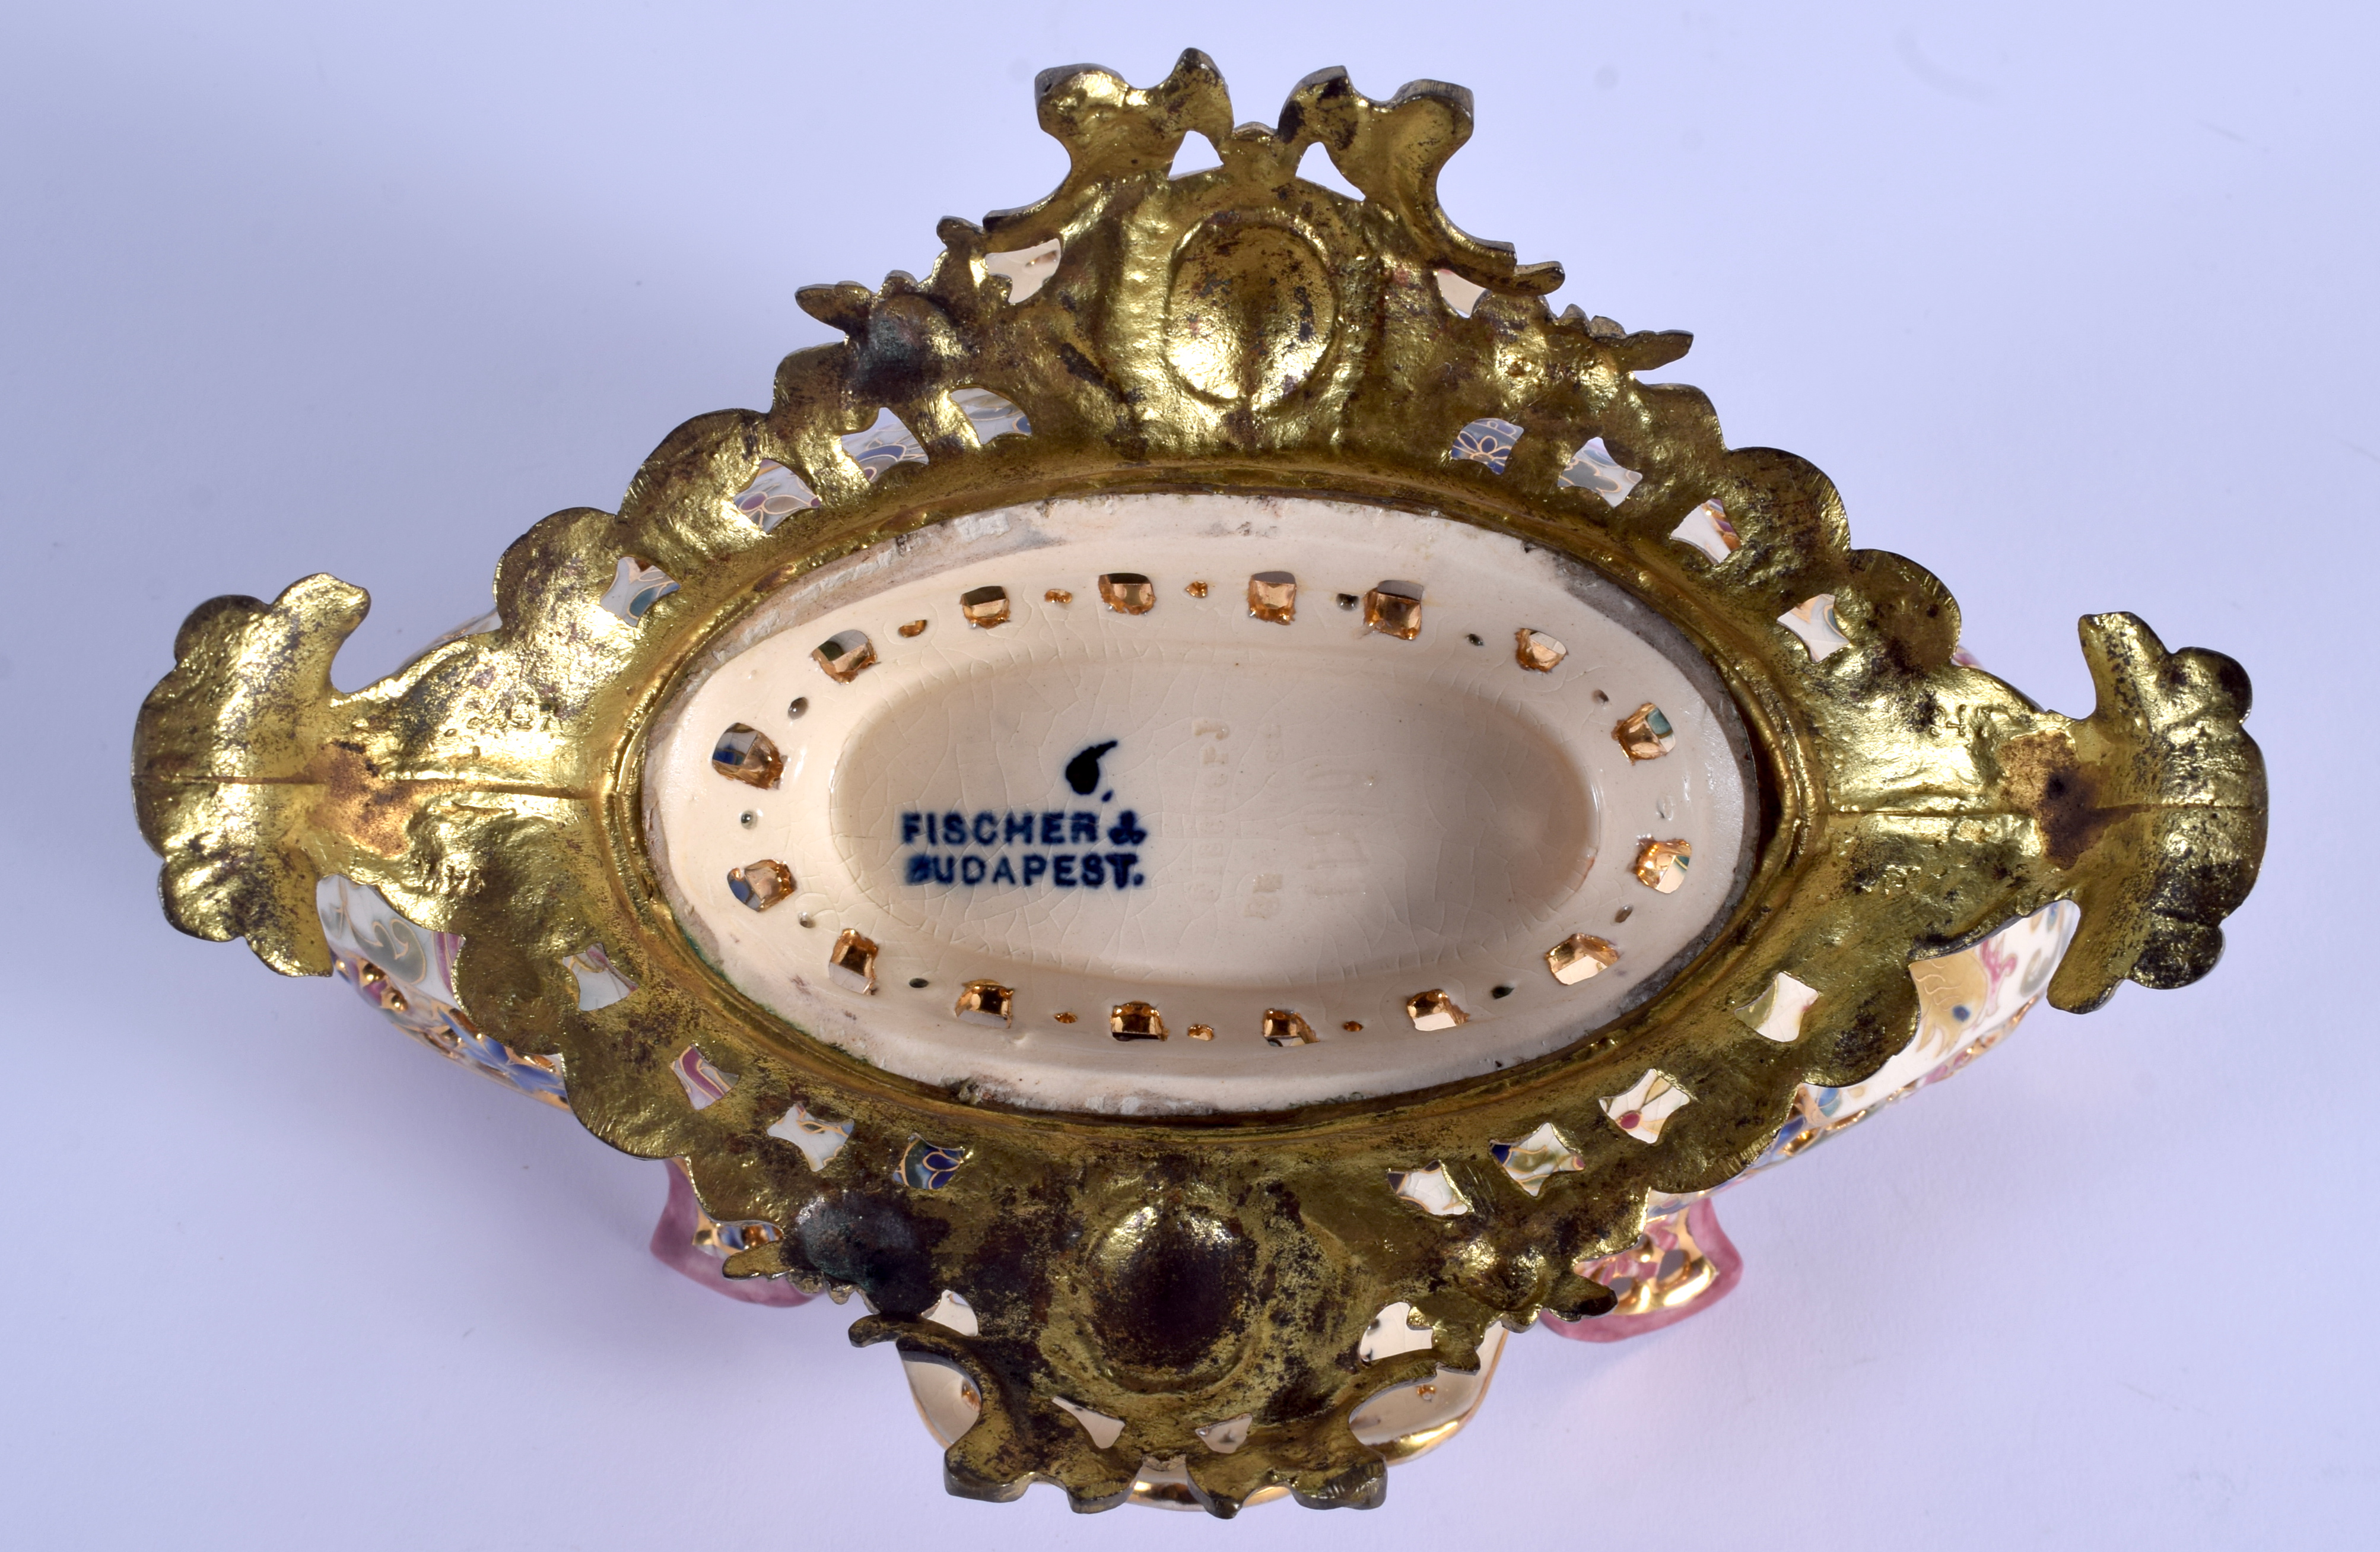 A 19TH CENTURY HUNGARIAN FISCHER POTTERY BOWL upon a gilt metal base. 24 cm x 18 cm. - Image 4 of 5